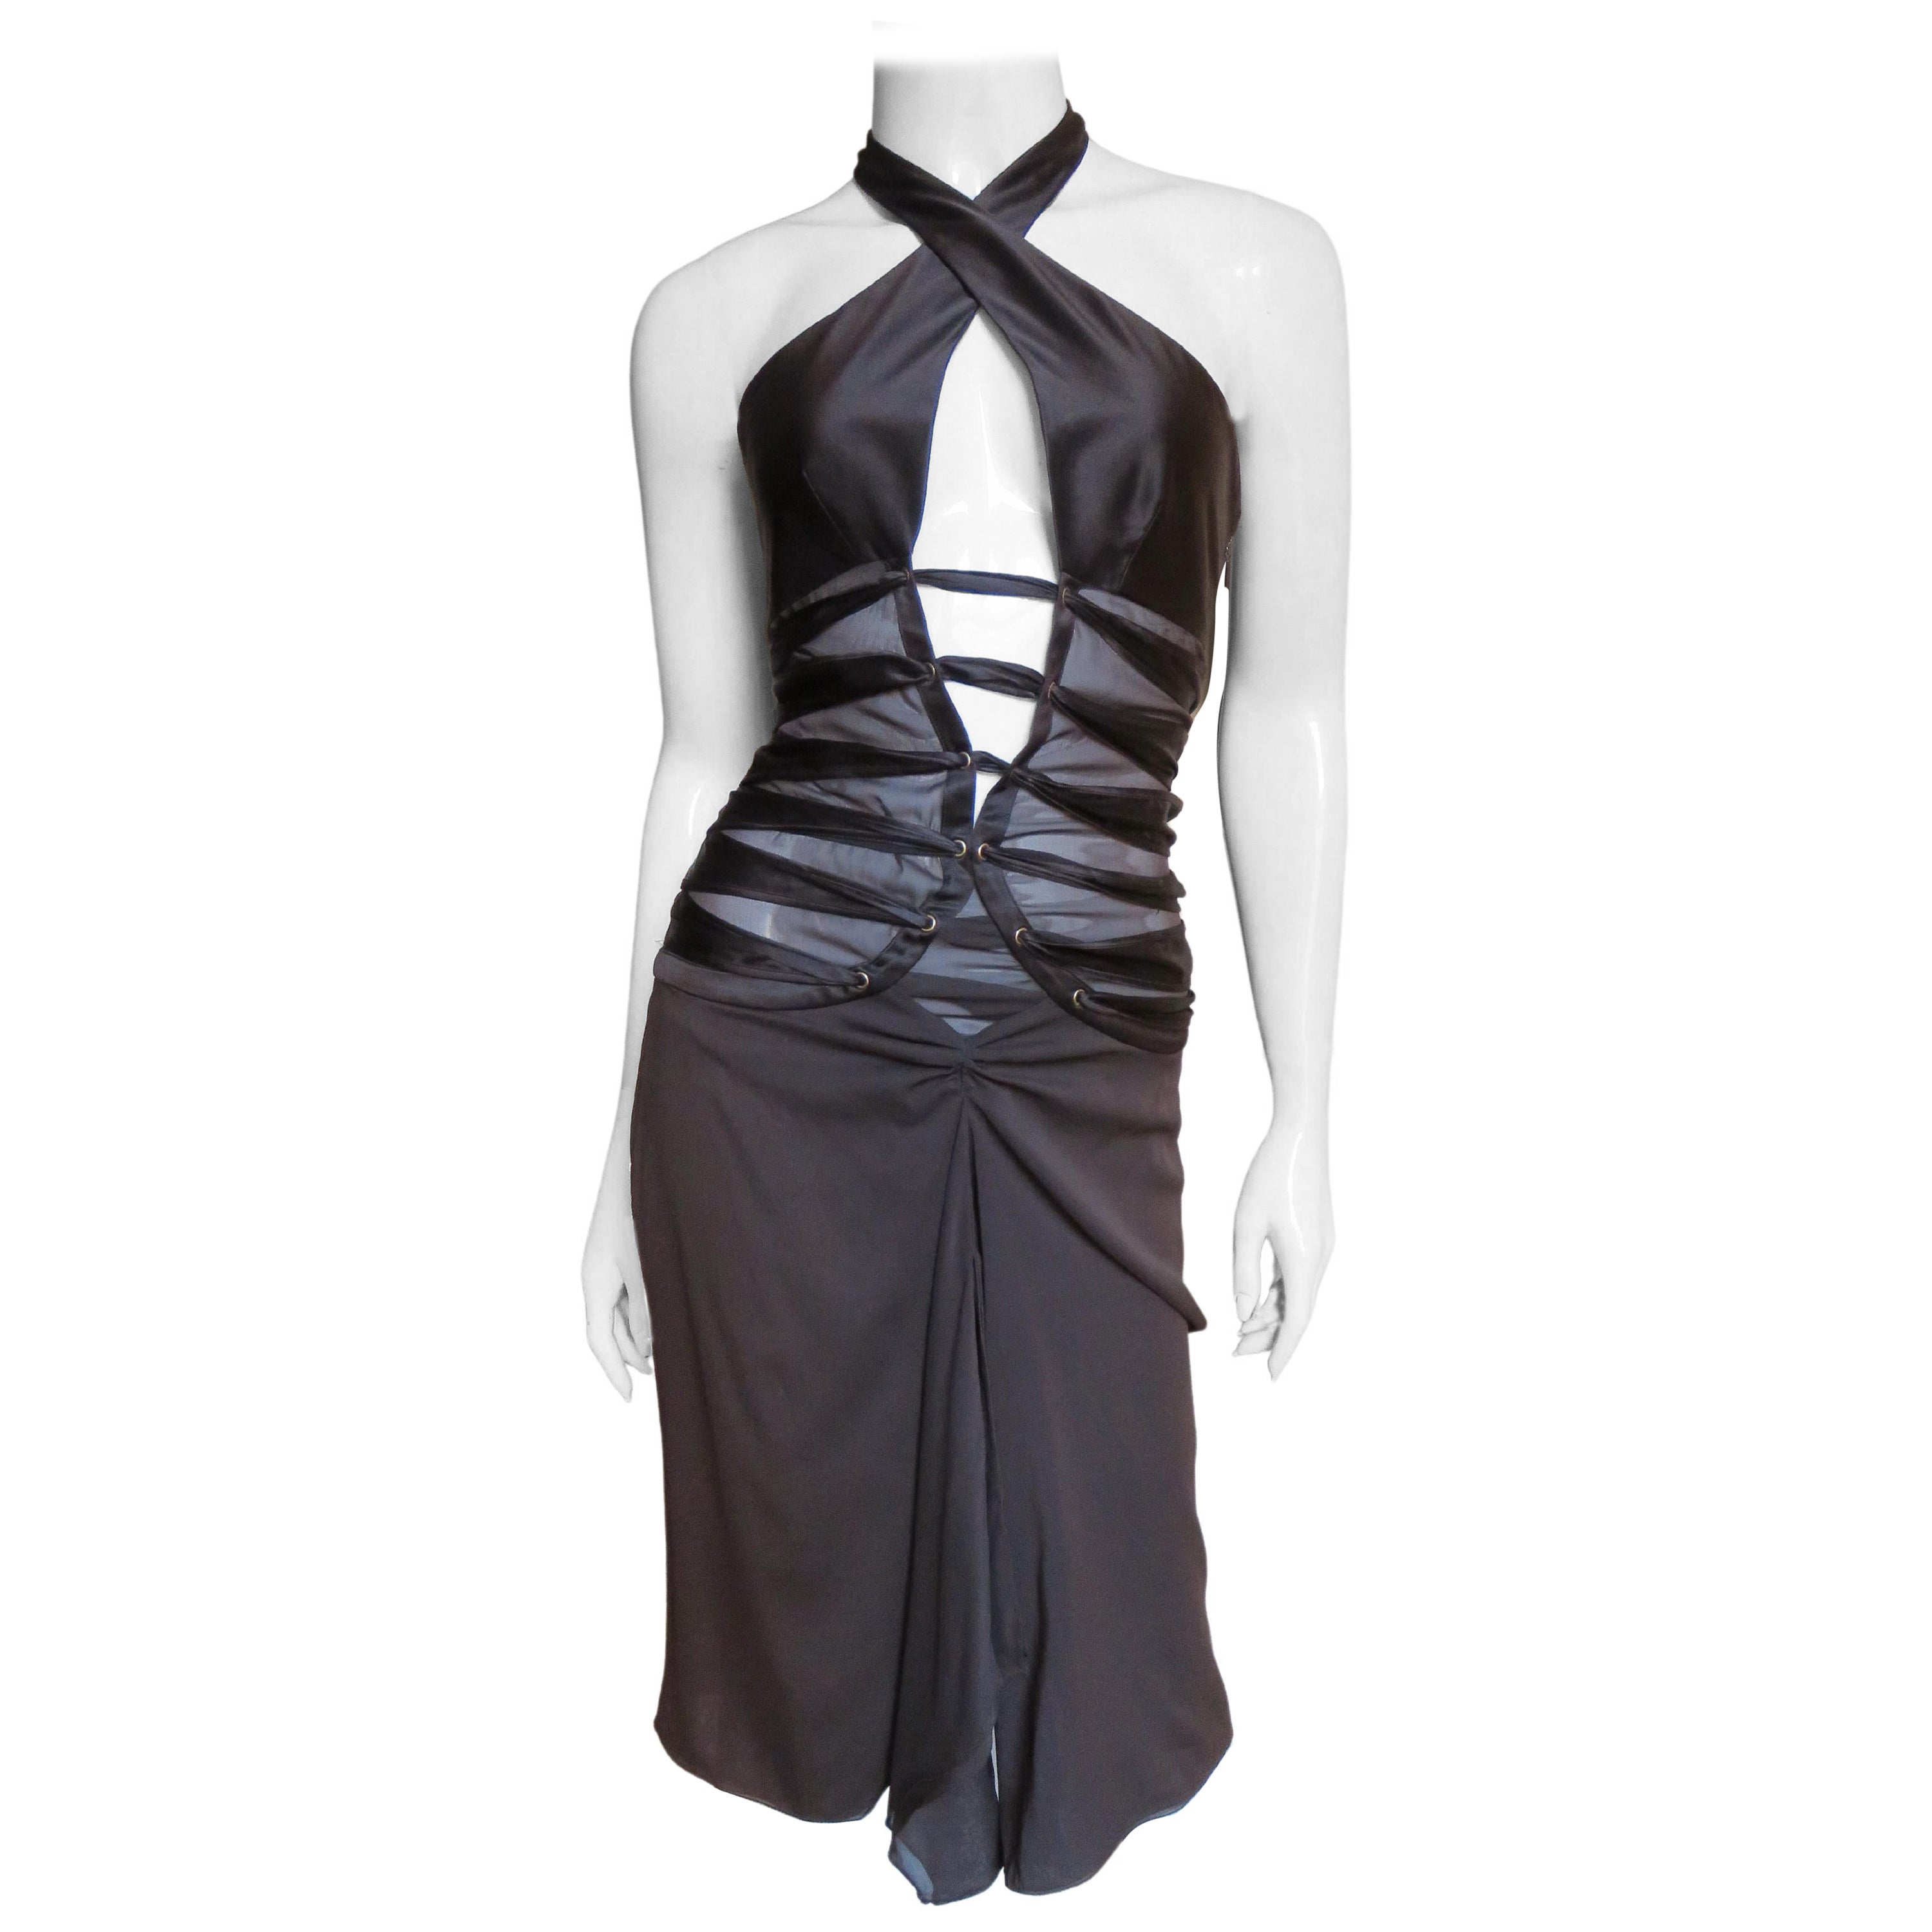 Tom Ford for Gucci S/S 2004 Silk Halter Dress For Sale